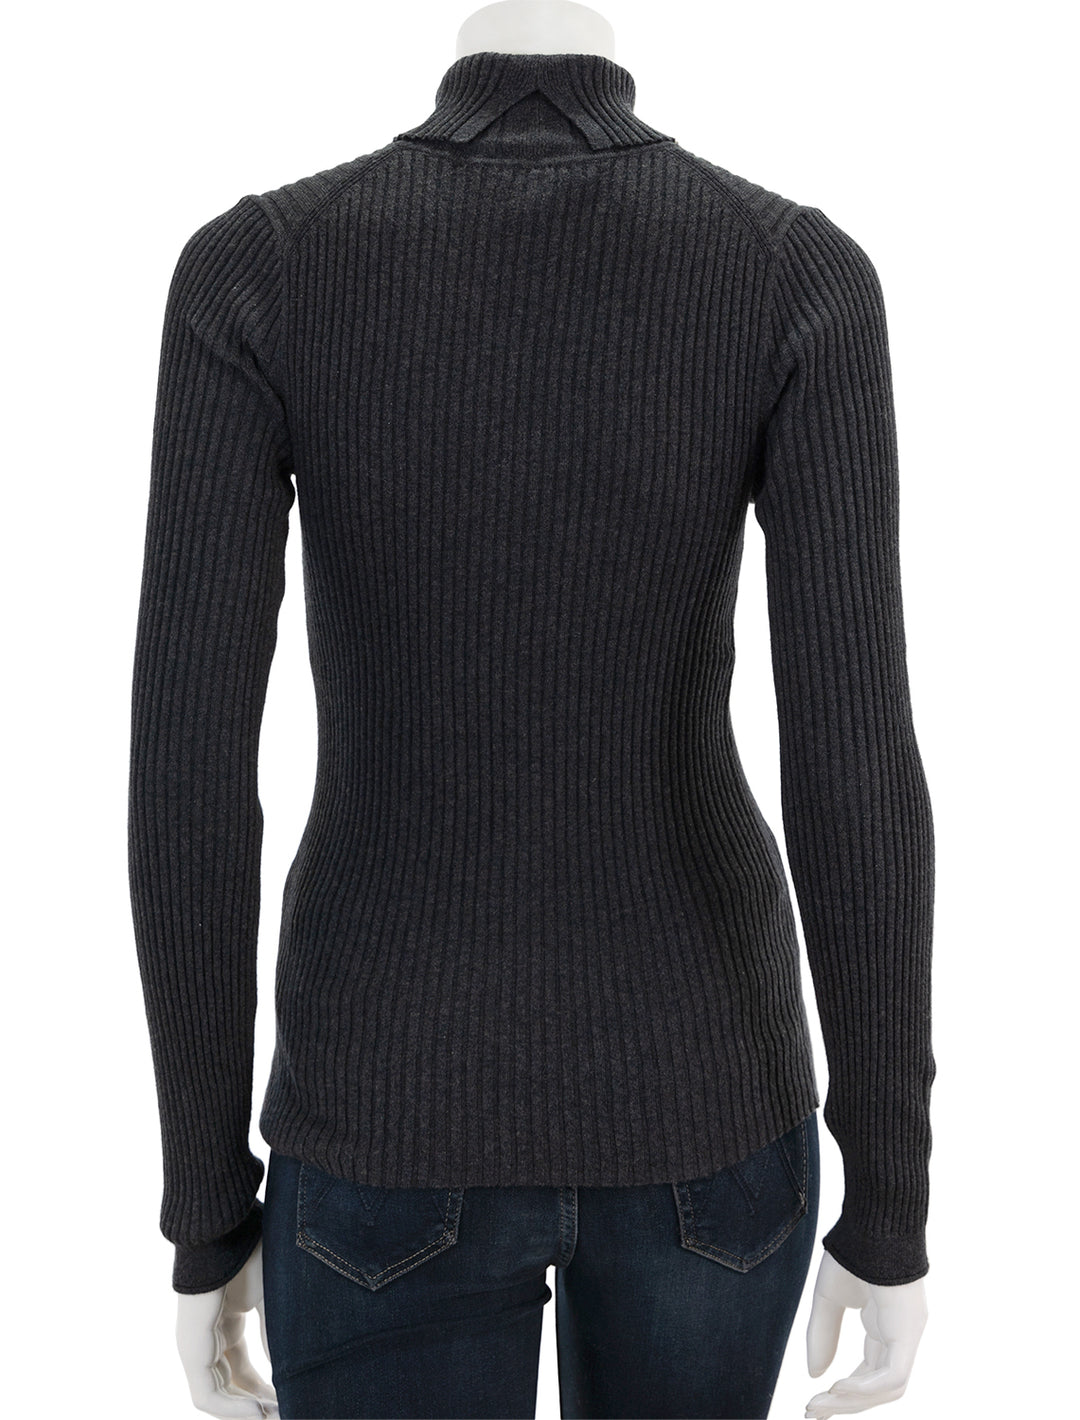 Back view of Alex Mill's cristy ribbed turtleneck in charcoal.